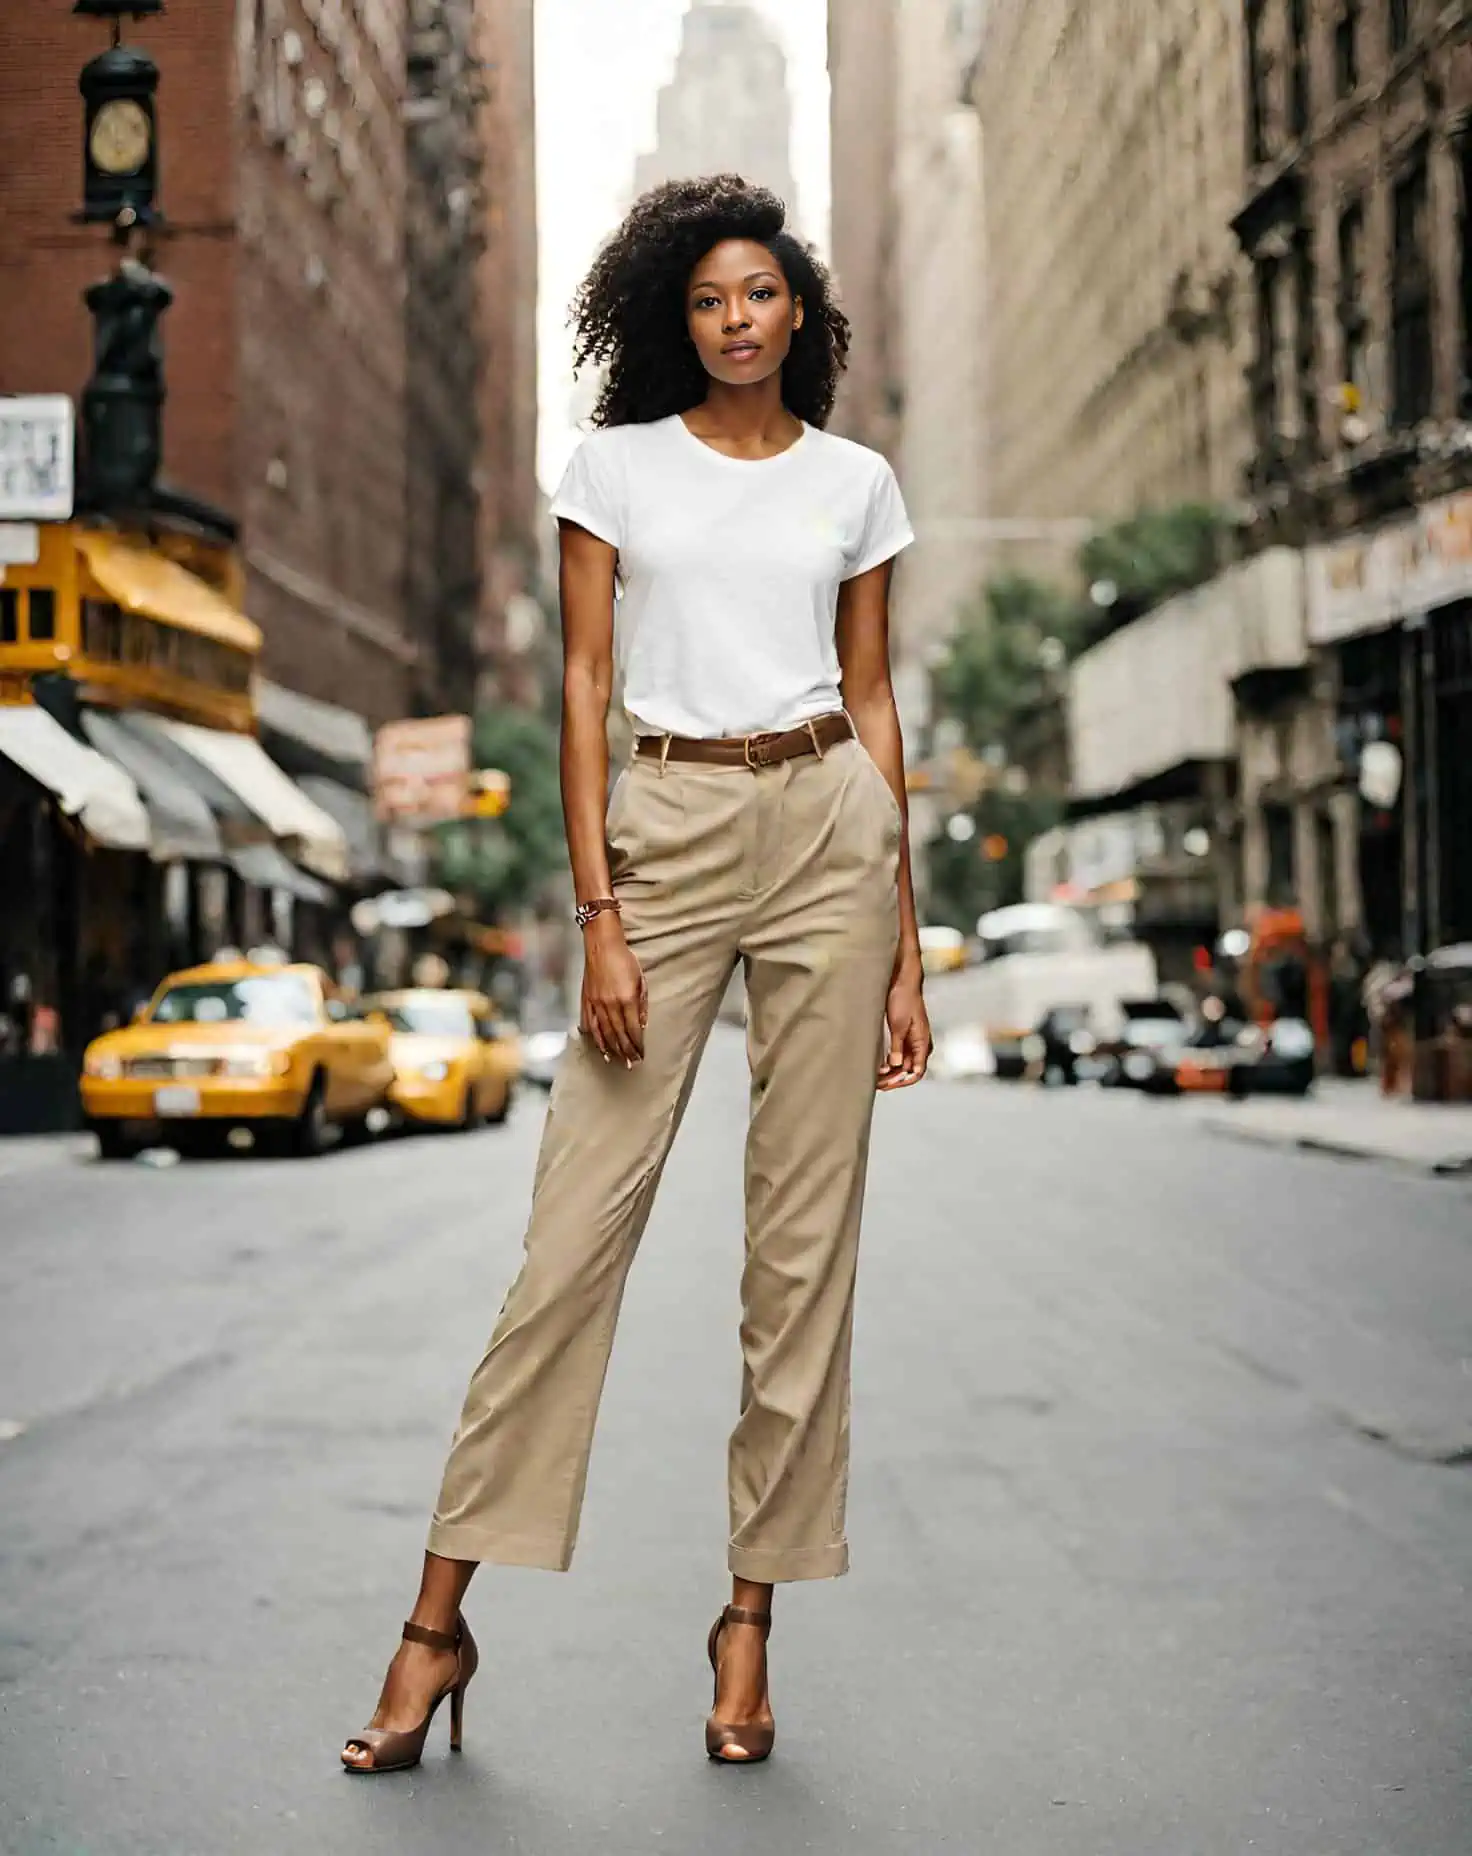 Premium Photo | Stylish woman in beige pants and sweater